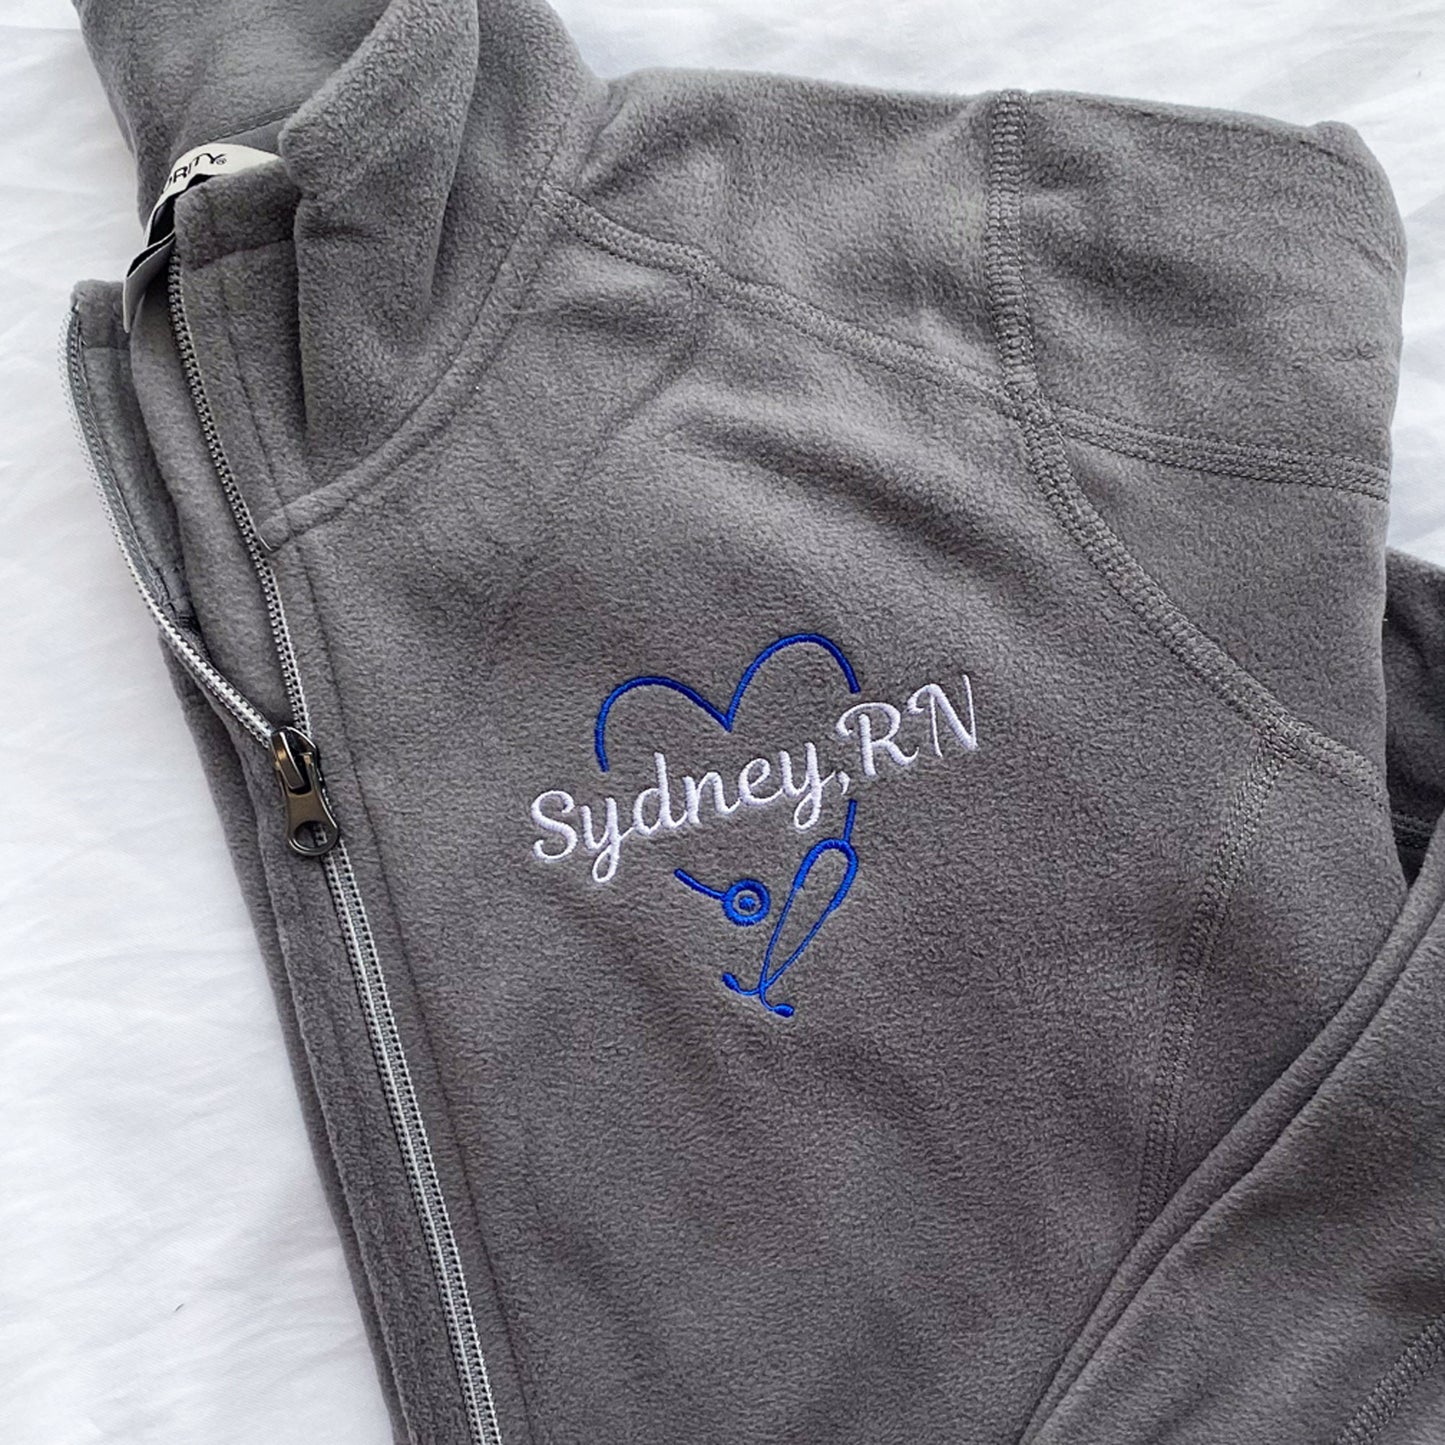 grey full zip fleece jacket with royal blue heart shaped stethoscope design with a custom name through the center embroidered on the left chest.